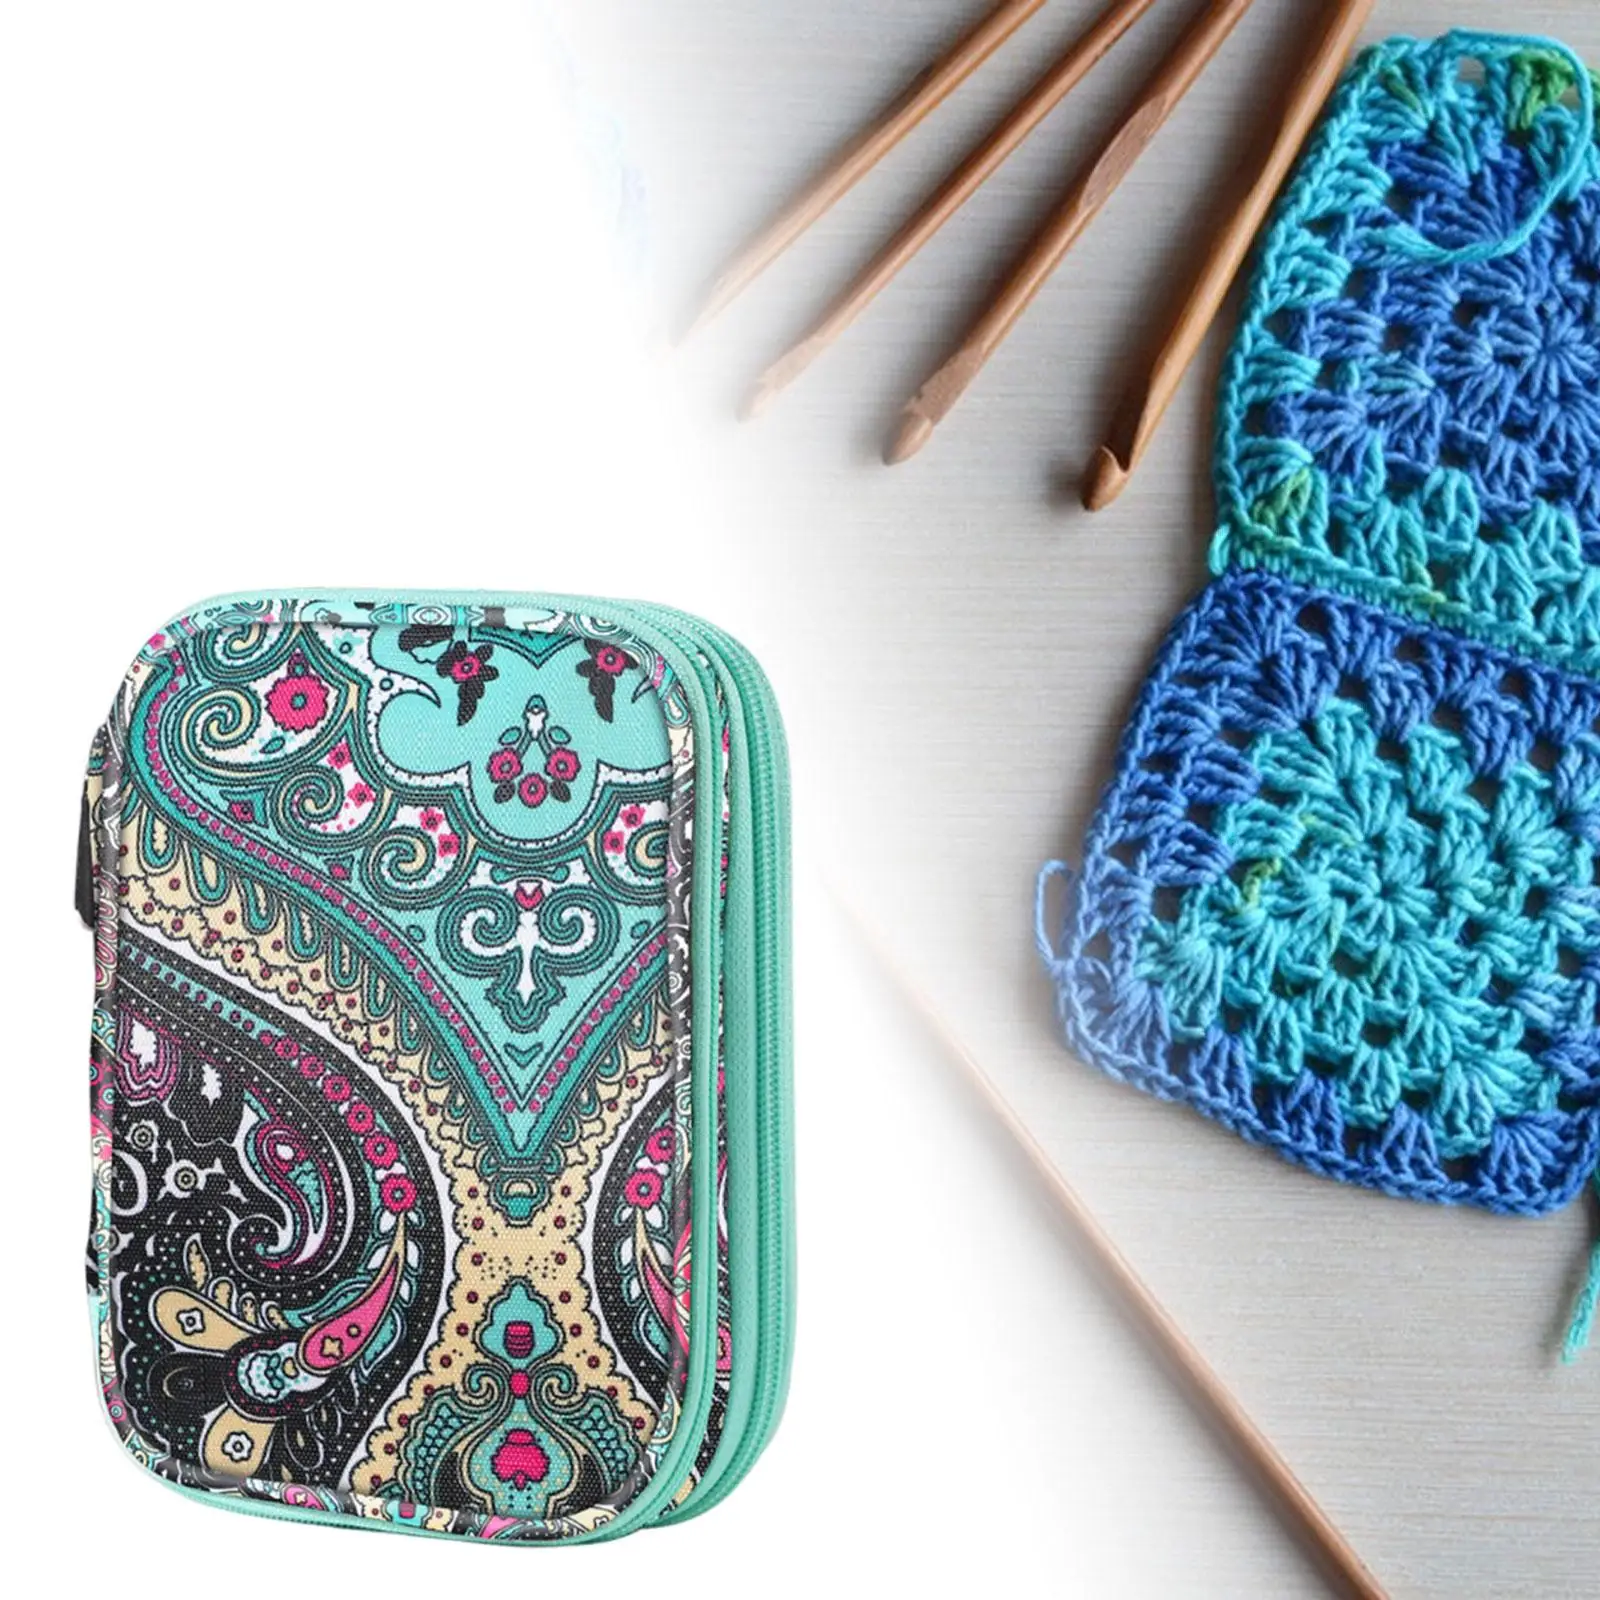 Knitting Needle Storage Bag with Zipper Easily to Carry Needle Scissors Knitting Needle Sewing Tool Pouch Crochet Hook Case